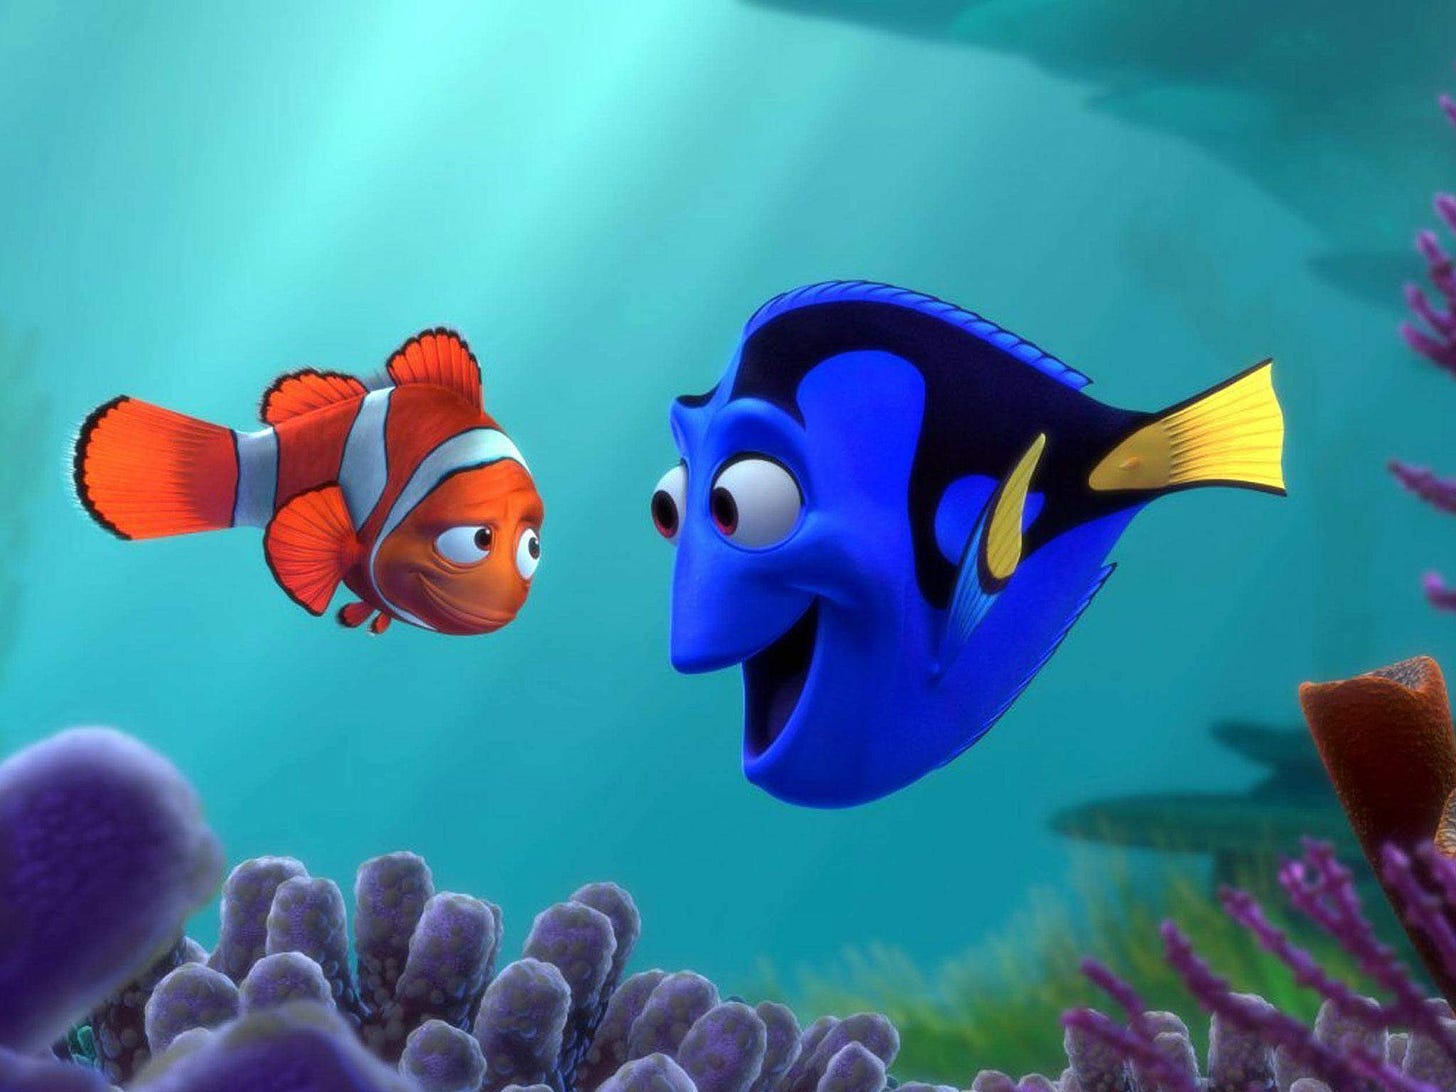 The lessons of Finding Dory are commendable, but why make a children's film  so complicated?